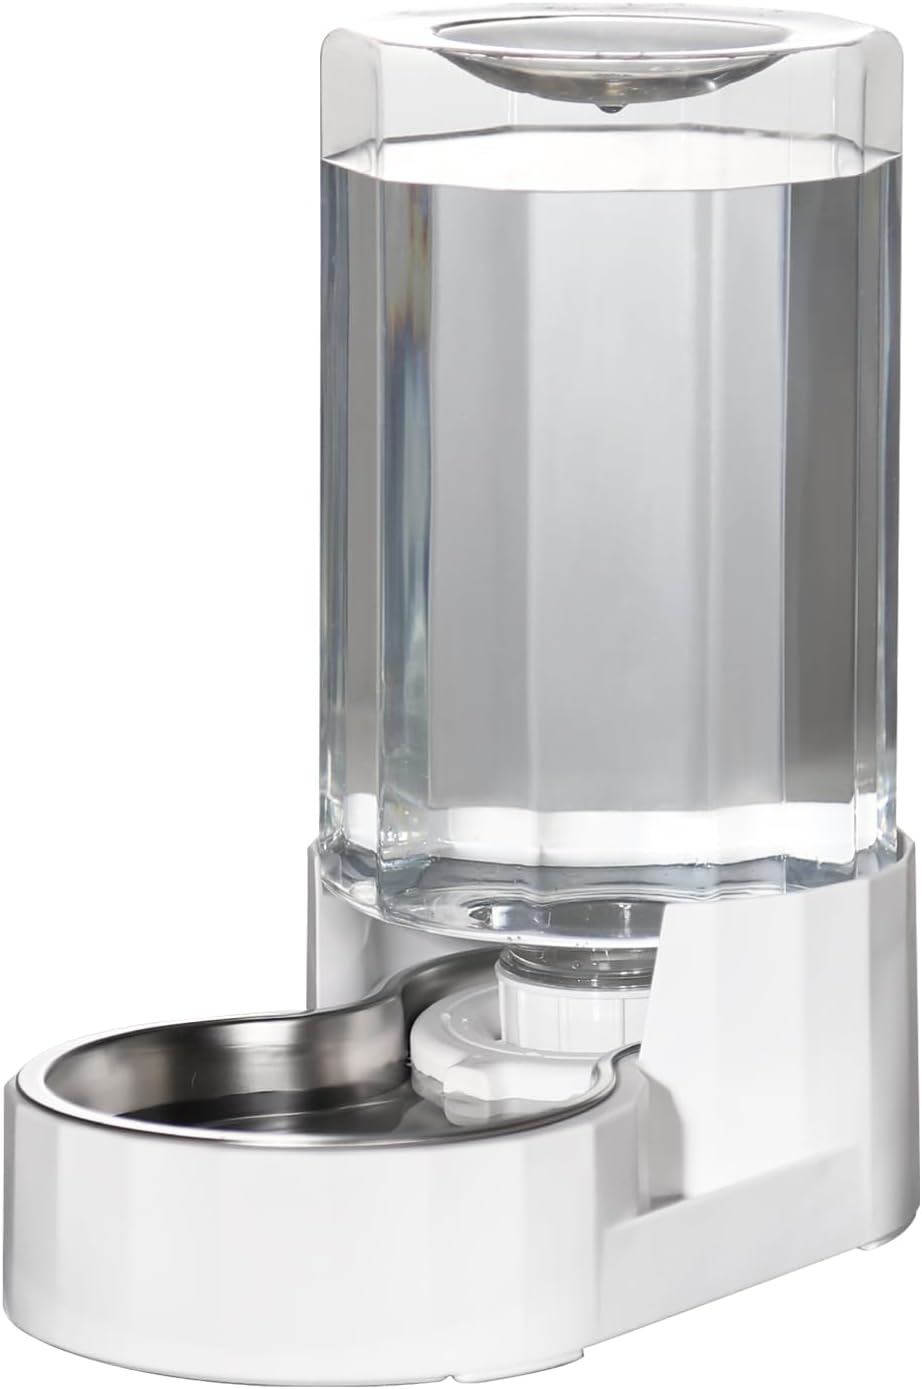 RIZZARI Automatic Gravity Stainless Steel Pet Waterer, Fortunate Angular Water Feeder with Edges, 100% BPA-Free, Safe and Large Capacity, Suitable for Small and Medium-Sized Cats and Dogs (4L)